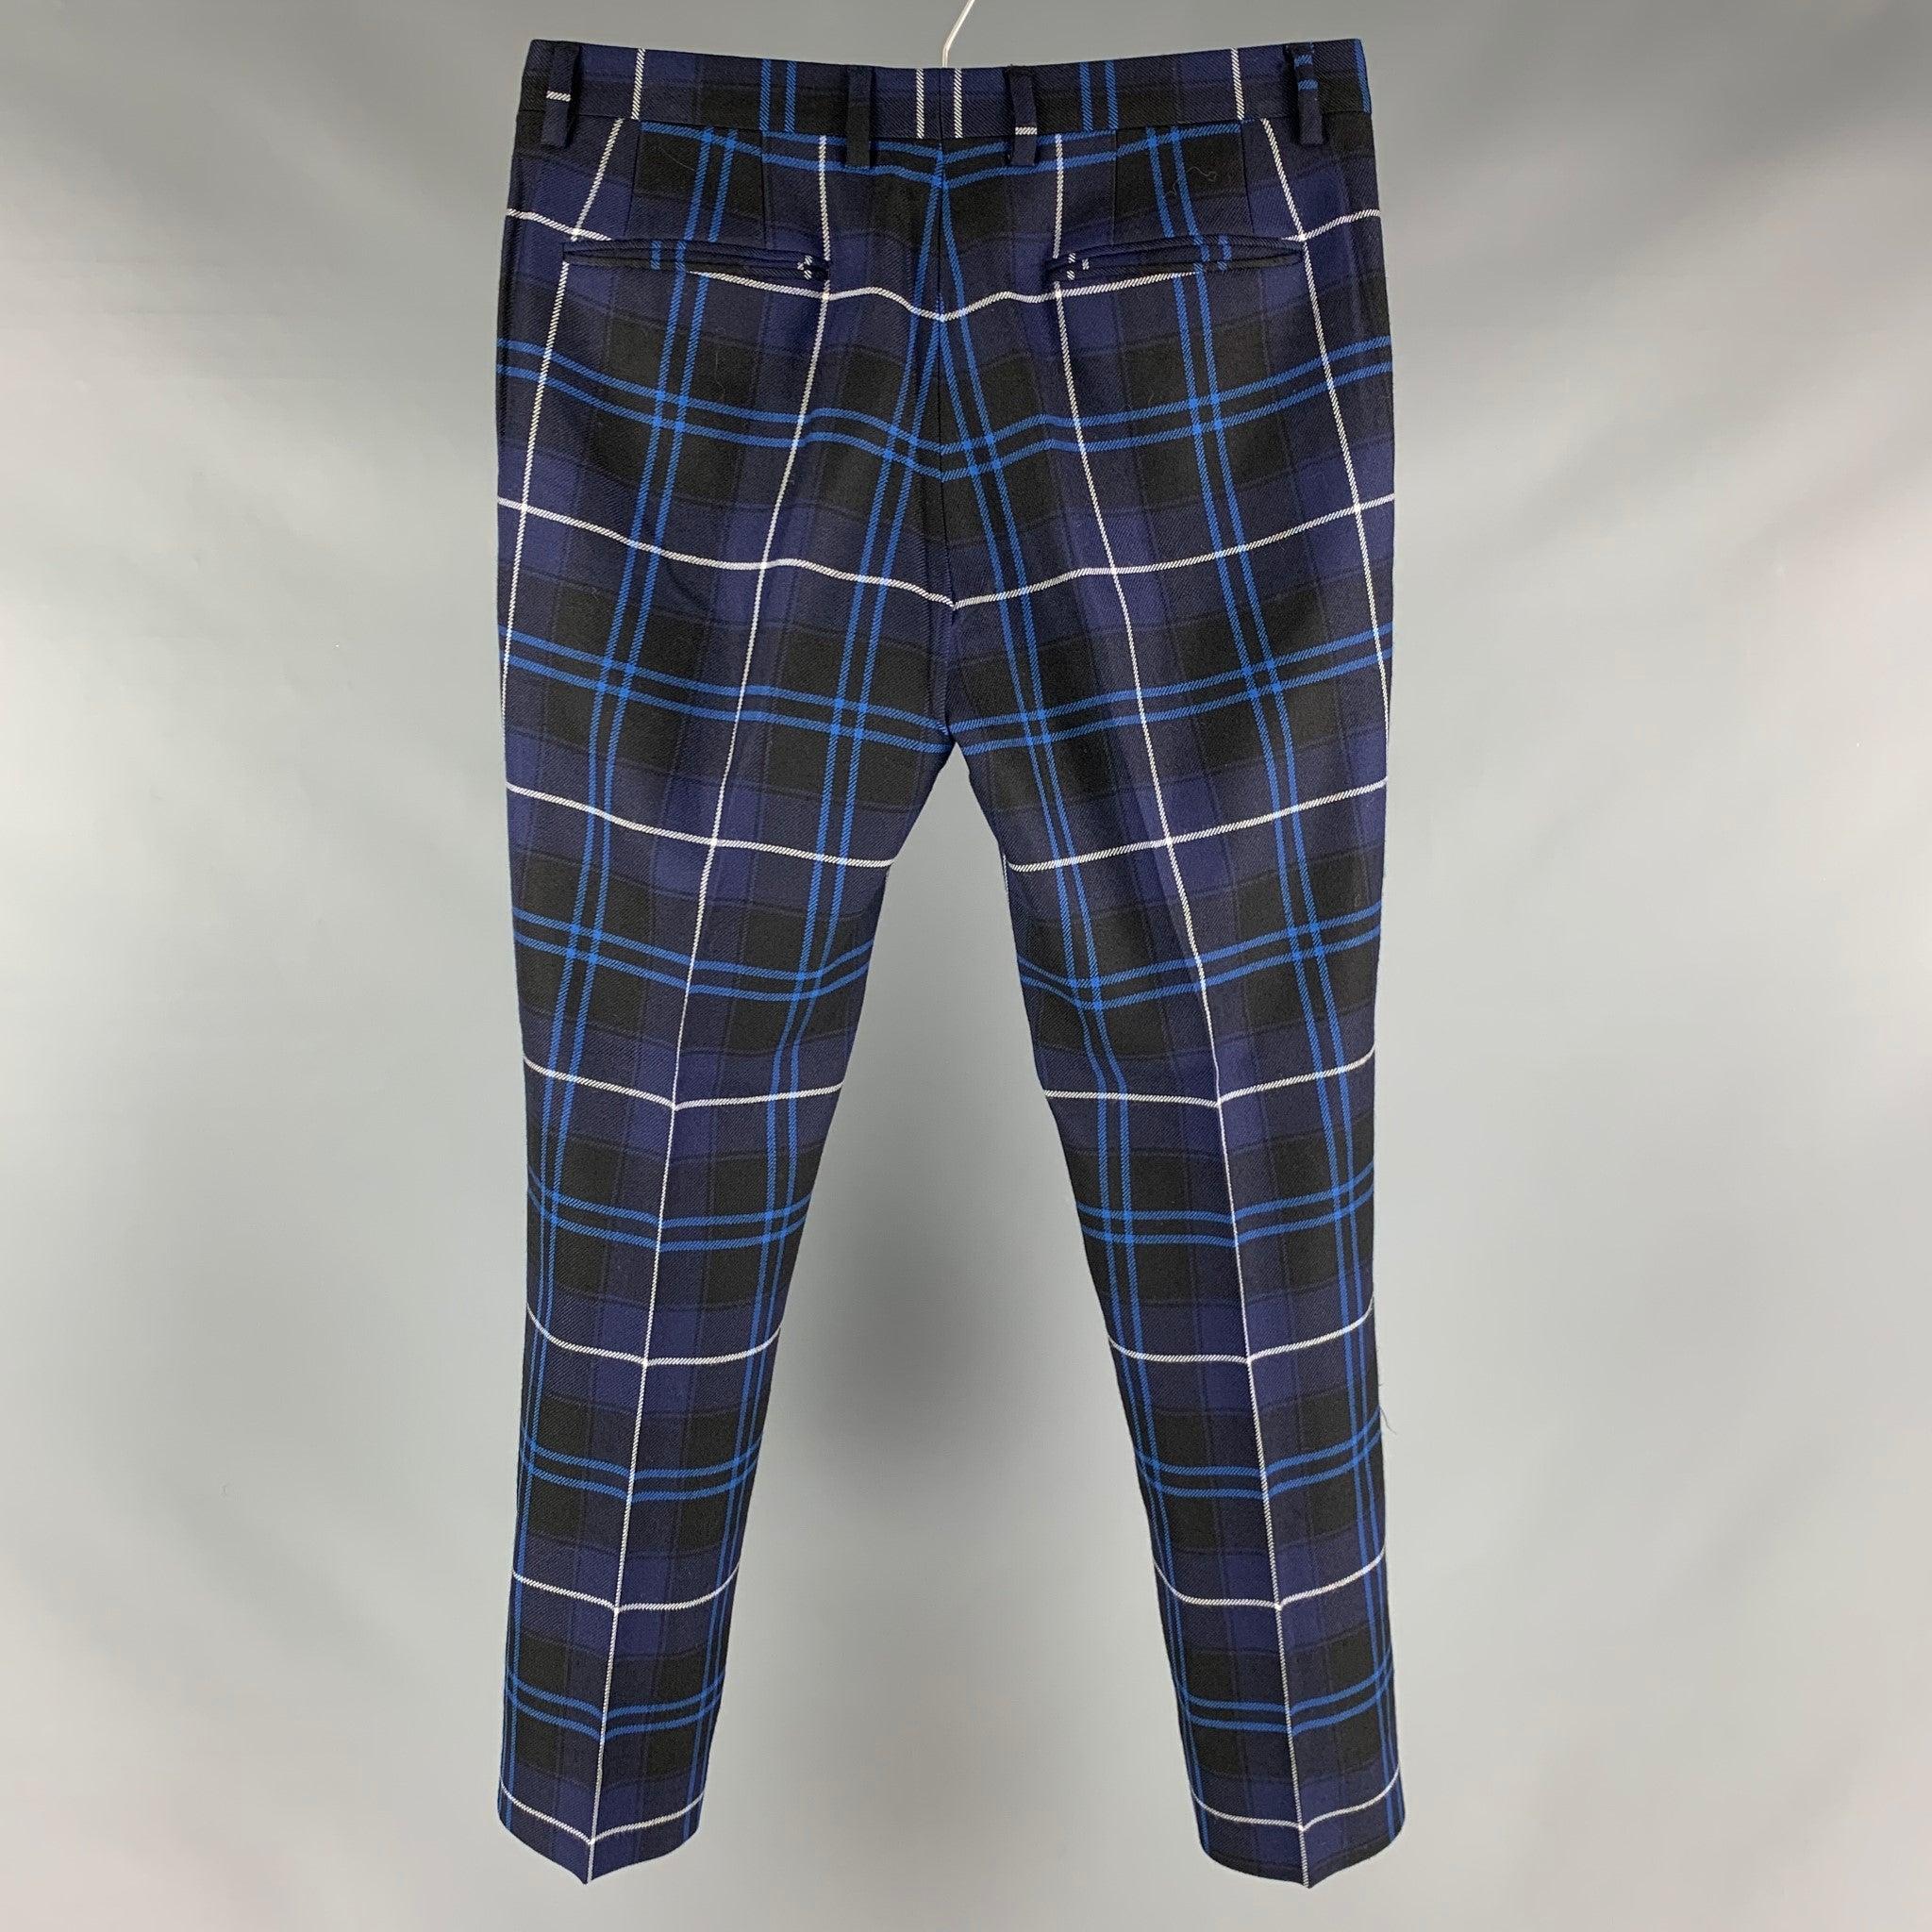 VERSACE dress pants comes in a blue, navy, and white plaid wool featuring a slim fit, flat front, and a zip fly closure. Made in ItalyExcellent Pre-Owned Condition. 

Marked:  48 

Measurements: 
 Waist: 32 inches Rise: 8 inches Inseam: 29.5 inches